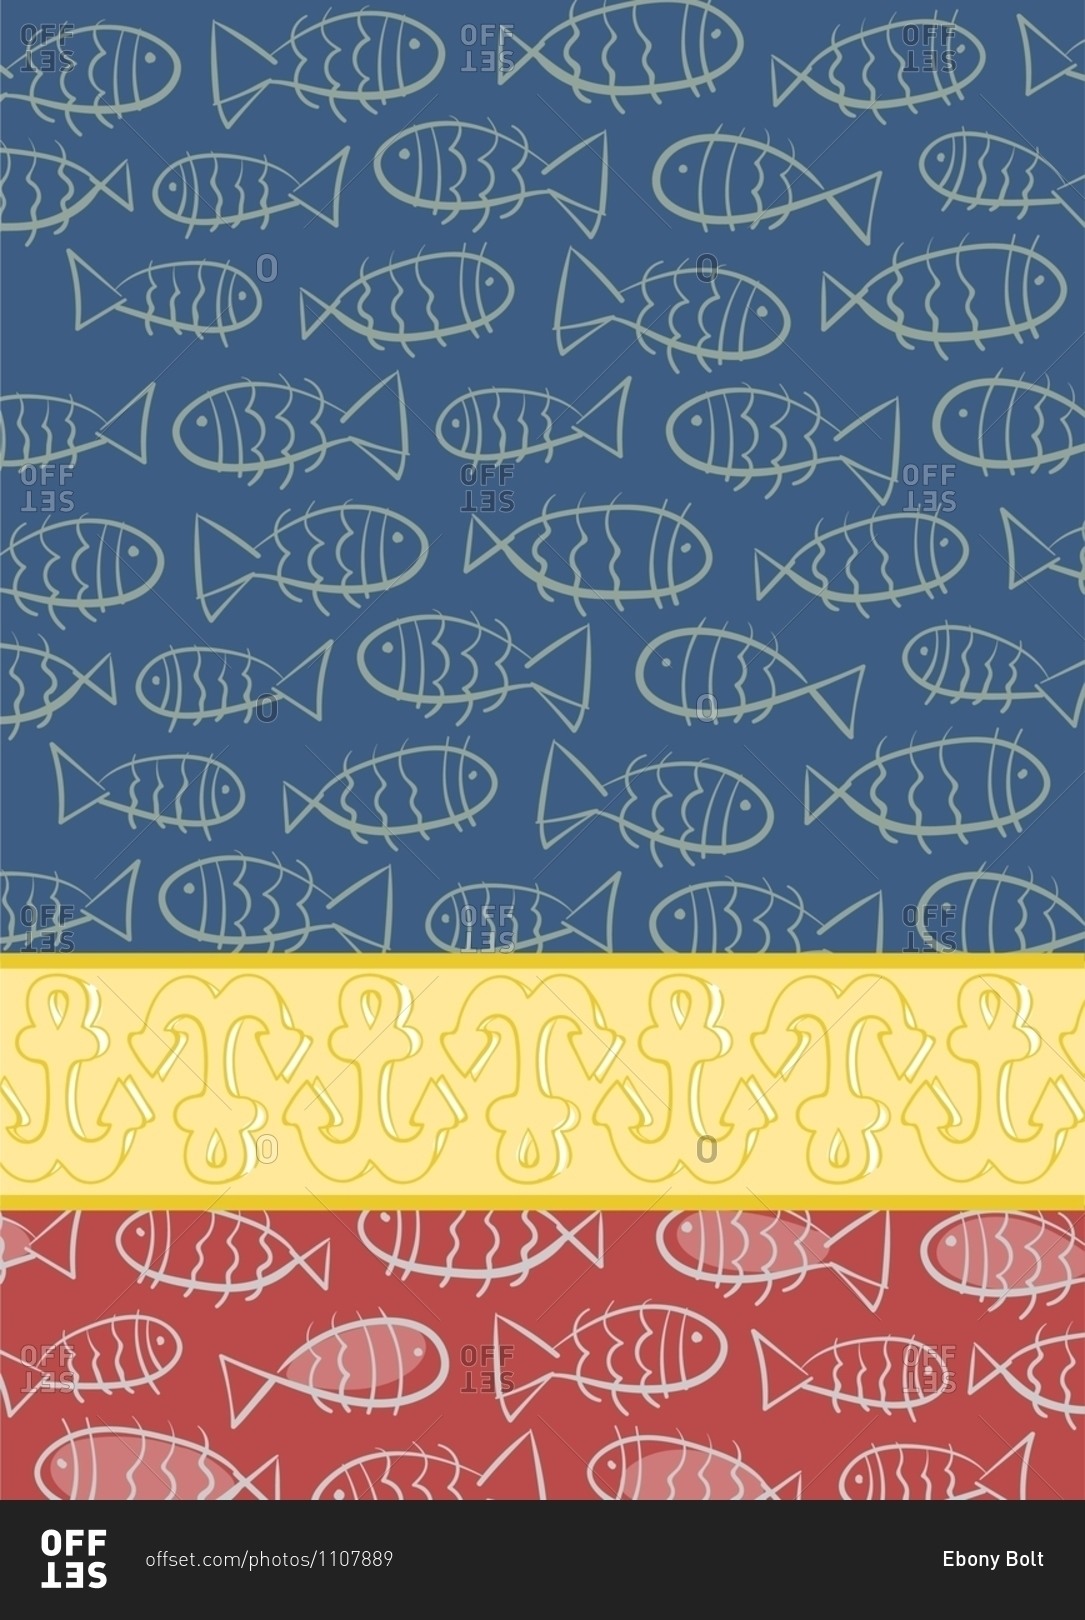 Fish and anchor motifs with a contrasting border stock photo\
- OFFSET